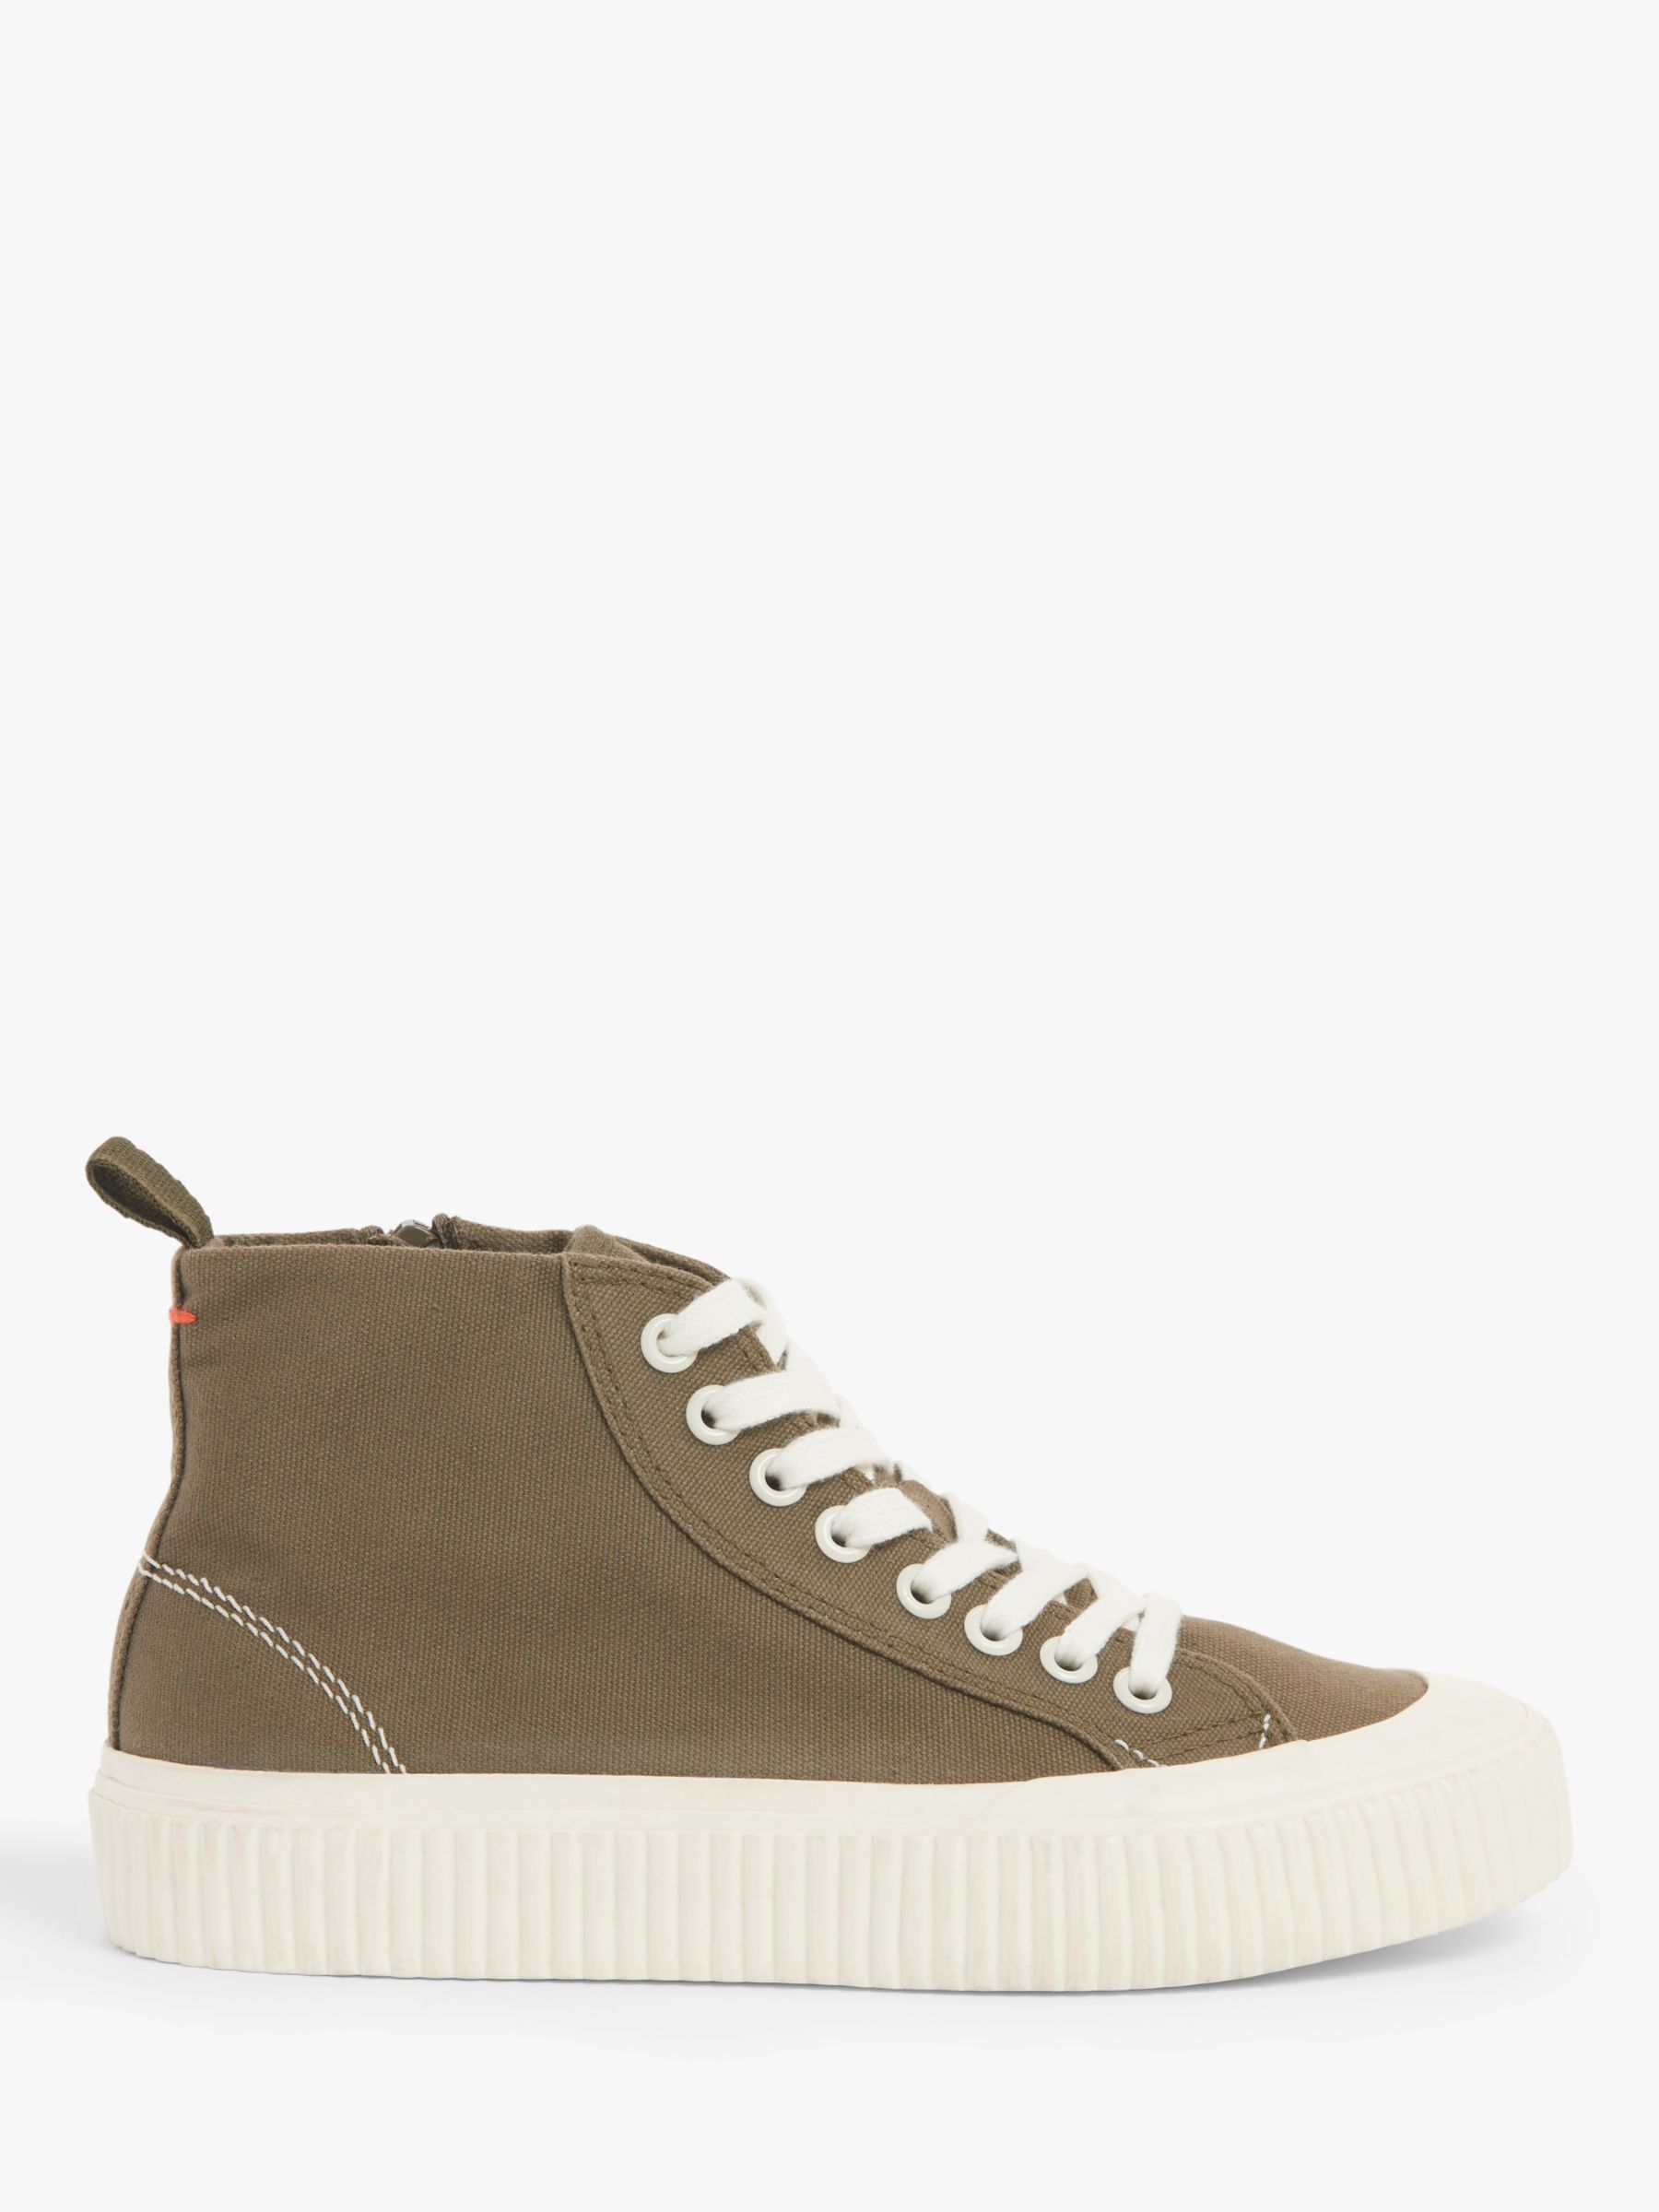 Kin Emily Canvas Hi-Top Trainers, Green